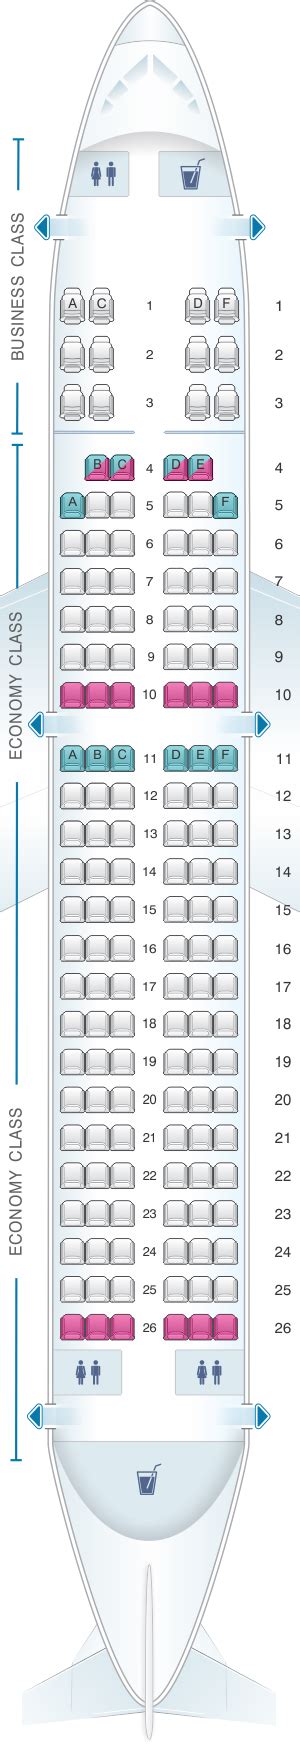 Seat Map Air India Airbus A320 Twin Classic Seatmaestro 55 Off